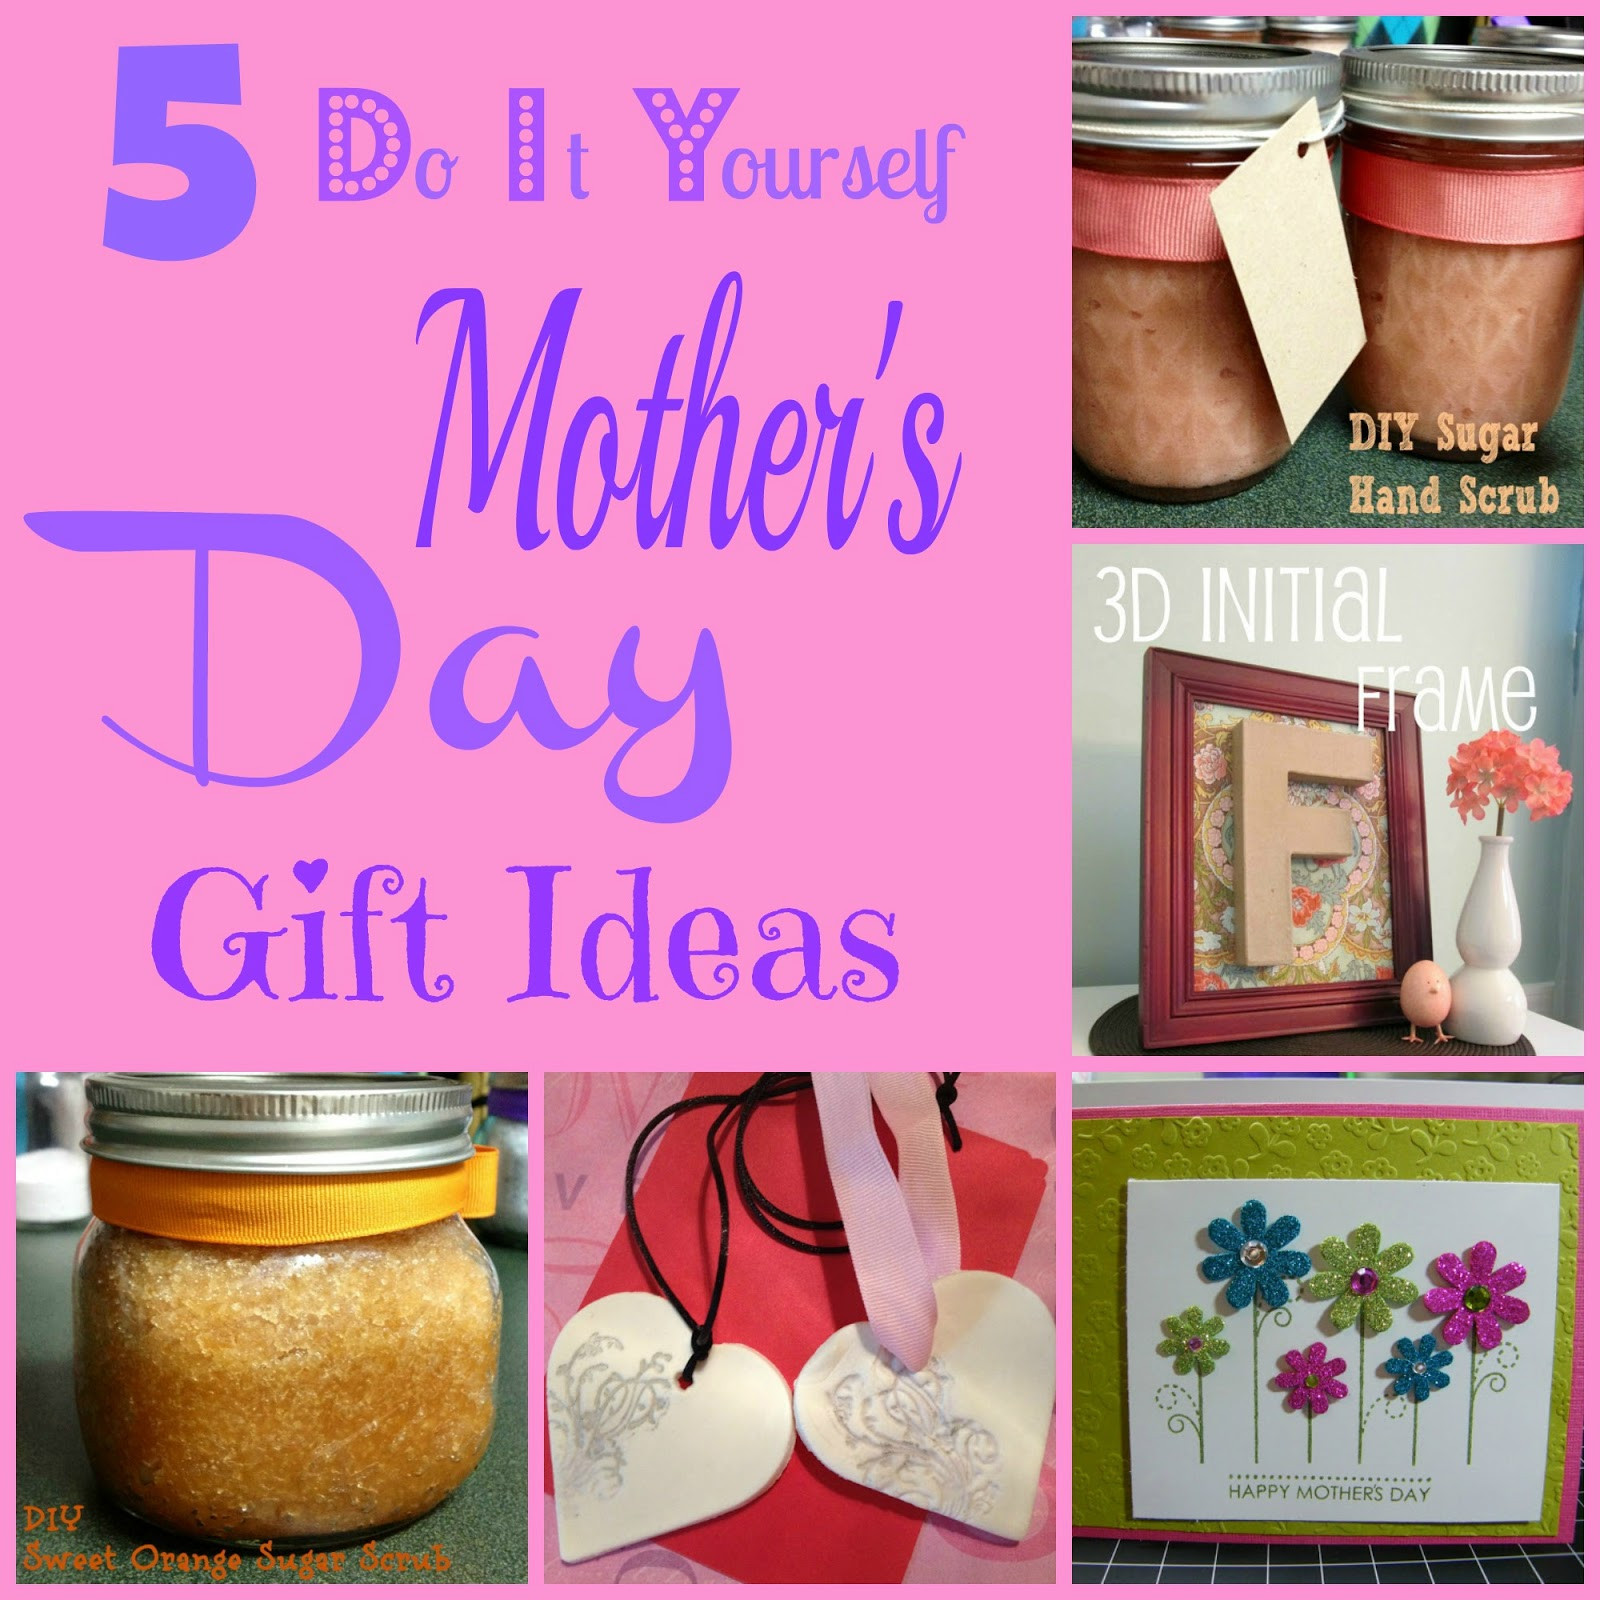 Diy Mothers Day Gift Ideas
 5 DIY Mother s Day Gift Ideas Outnumbered 3 to 1